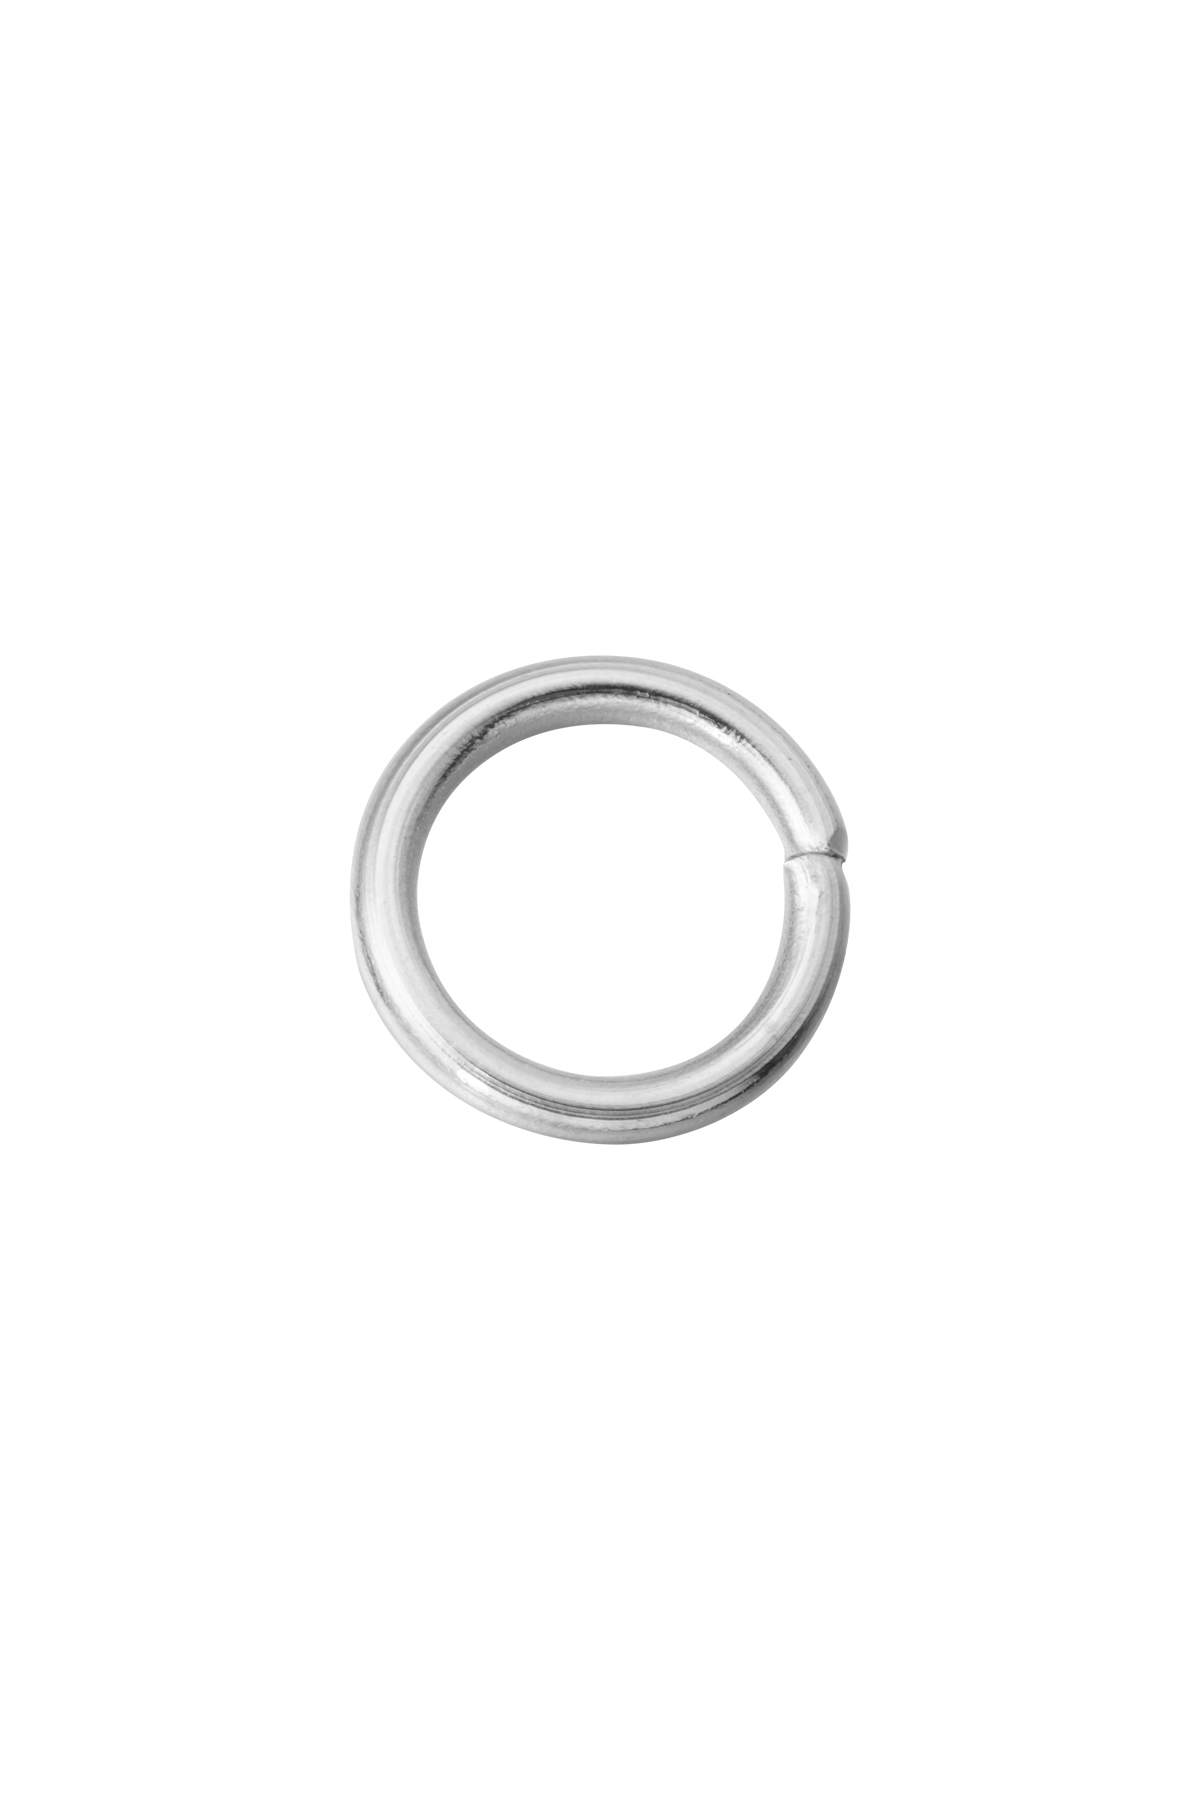 DIY connecting ring large - silver